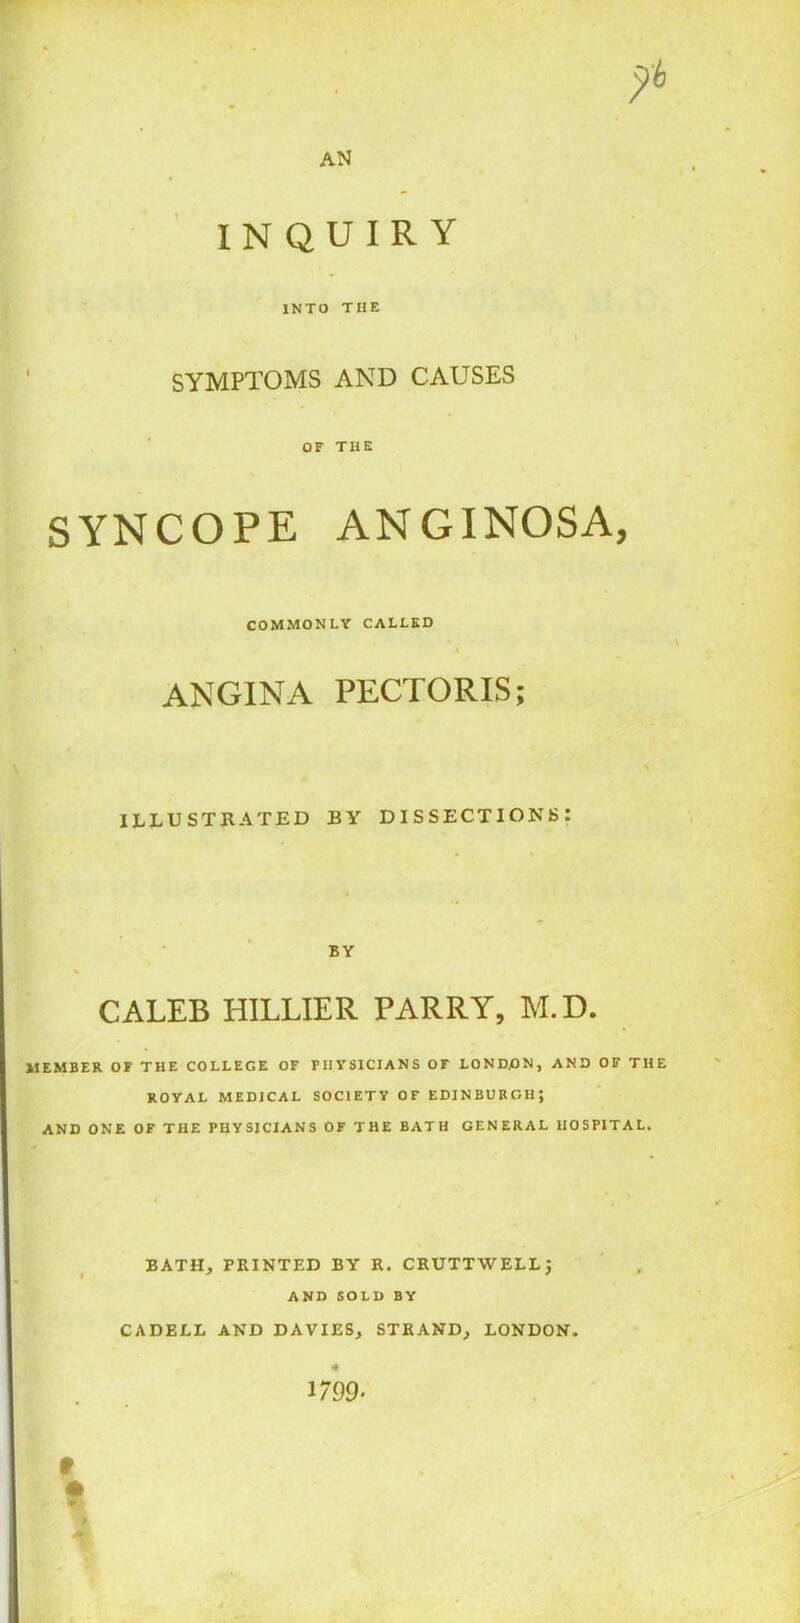 yb AN INQUIRY INTO THE i SYMPTOMS AND CAUSES OF THE SYNCOPE ANGINOSA, COMMONLY CALLED i ANGINA PECTORIS; ILLUSTRATED BY DISSECTIONS: BY CALEB HILLIER PARRY, M.D. MEMBER OF THE COLLEGE OF PHYSICIANS OF LONDON, AND OF THE ROYAL MEDICAL SOCIETY OF EDINBURGH; AND ONE OF THE PHYSICIANS OF THE BATH GENERAL HOSPITAL. BATH, PRINTED BY R. CRUTTWELL) AND SOLD BY CADELL AND DAVIES, STRAND, LONDON. 1/99. f f